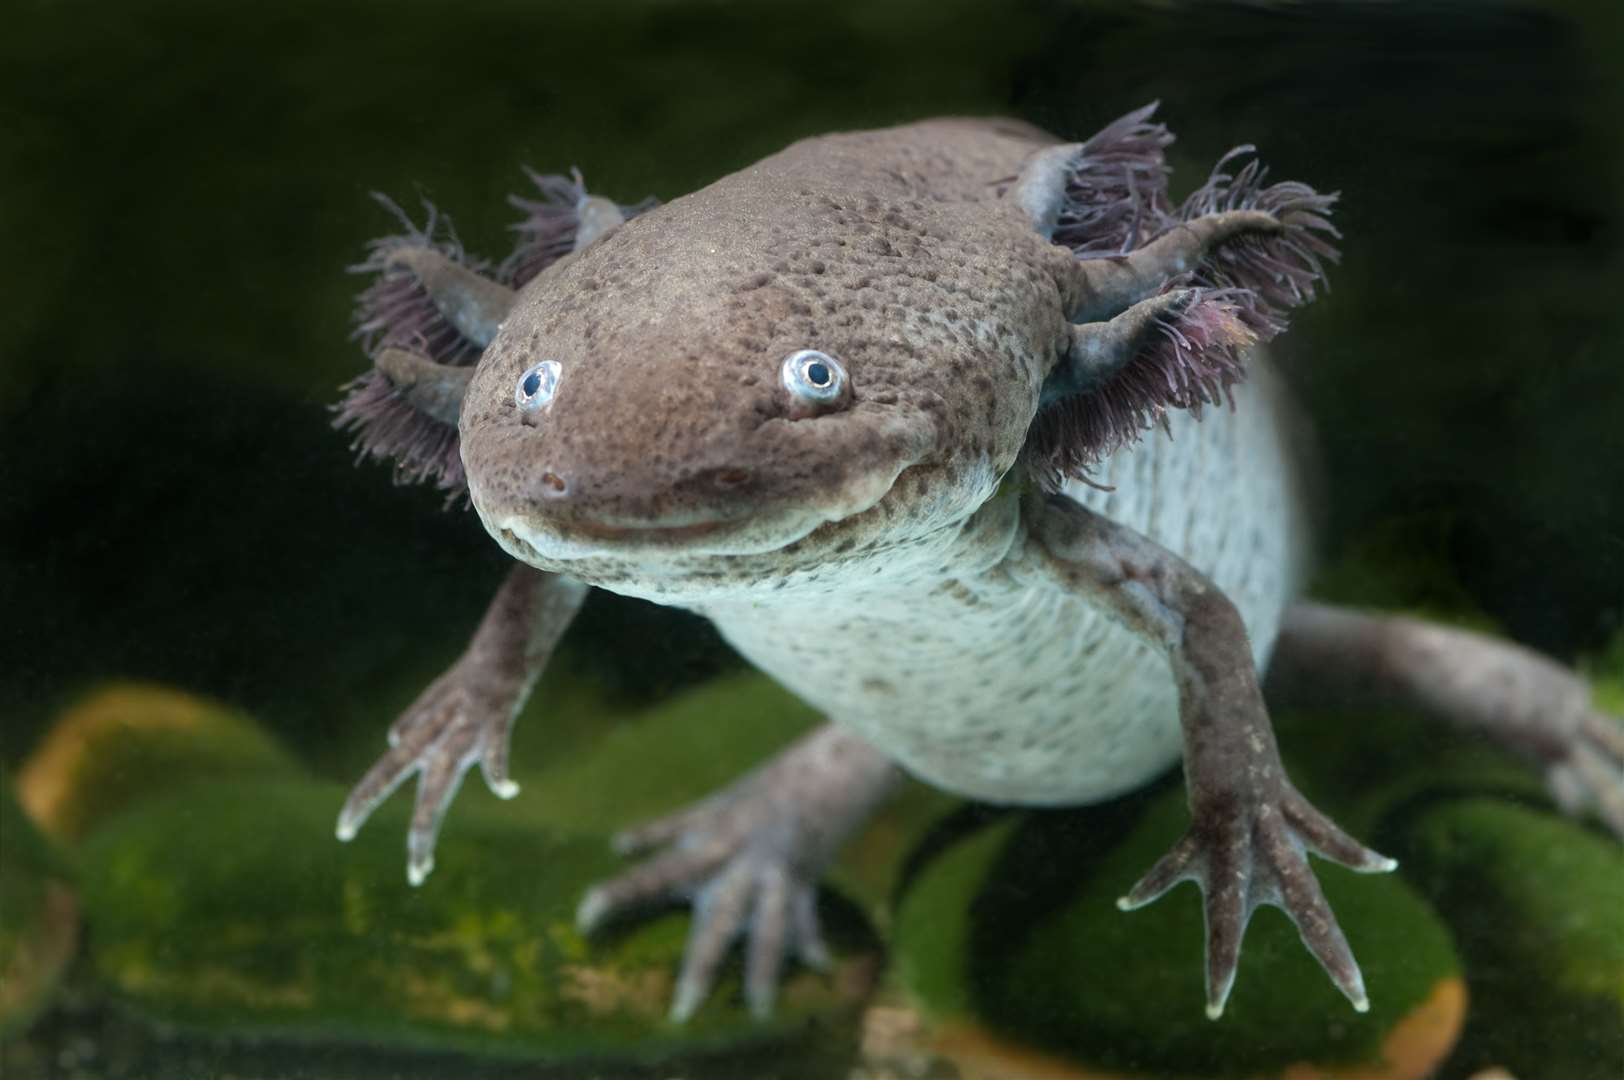 An axolotl is a type of salamander that comes from Mexico. Image: istock